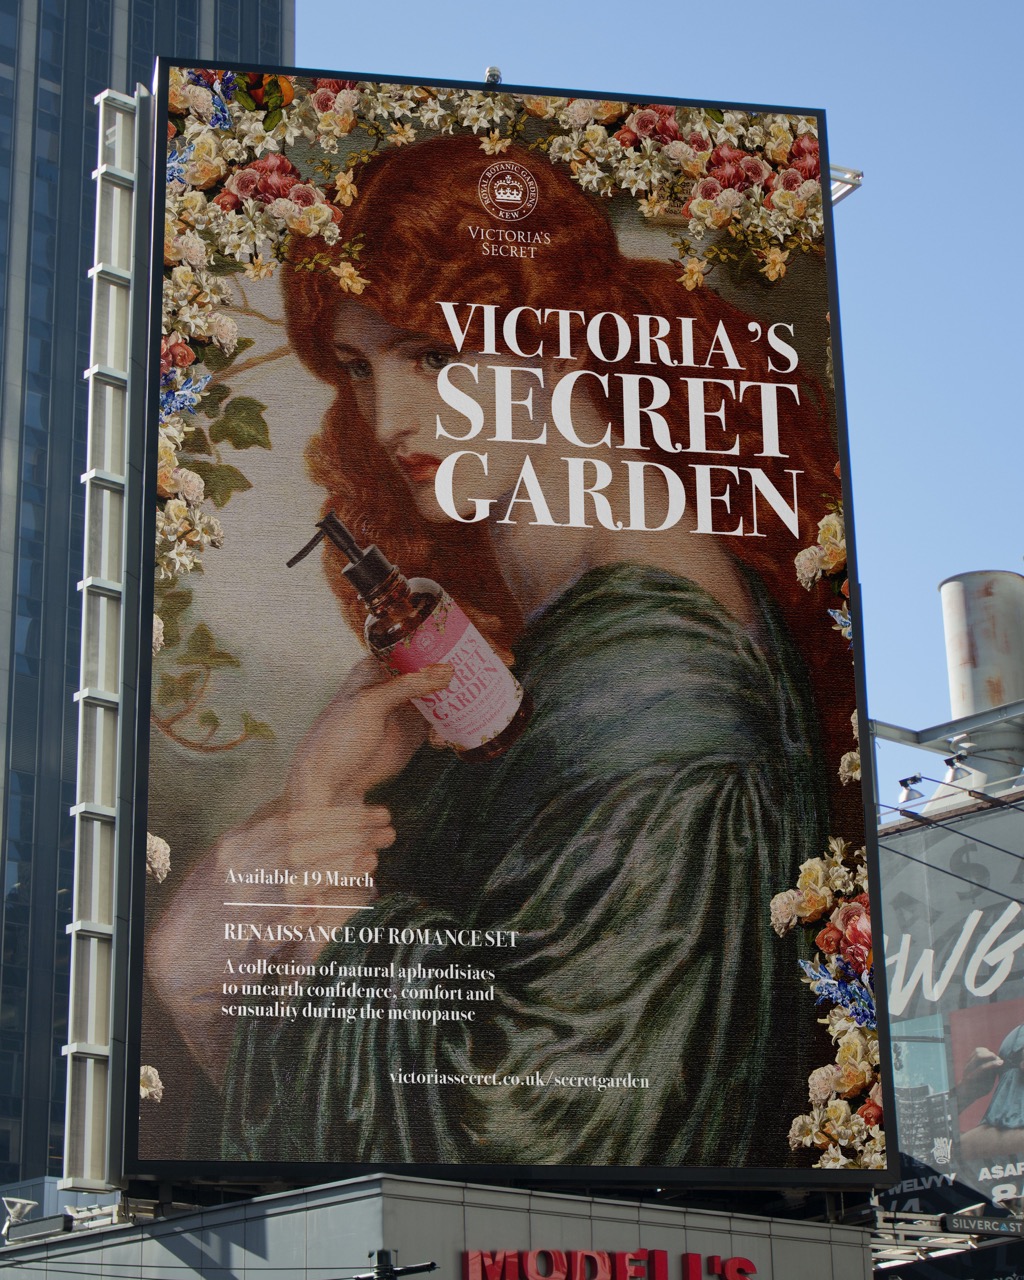 Billboard by Estelle Knowles showing floral patterns and raunchy renaissance imagery with Victoria's Secret Garden type in white on top left.